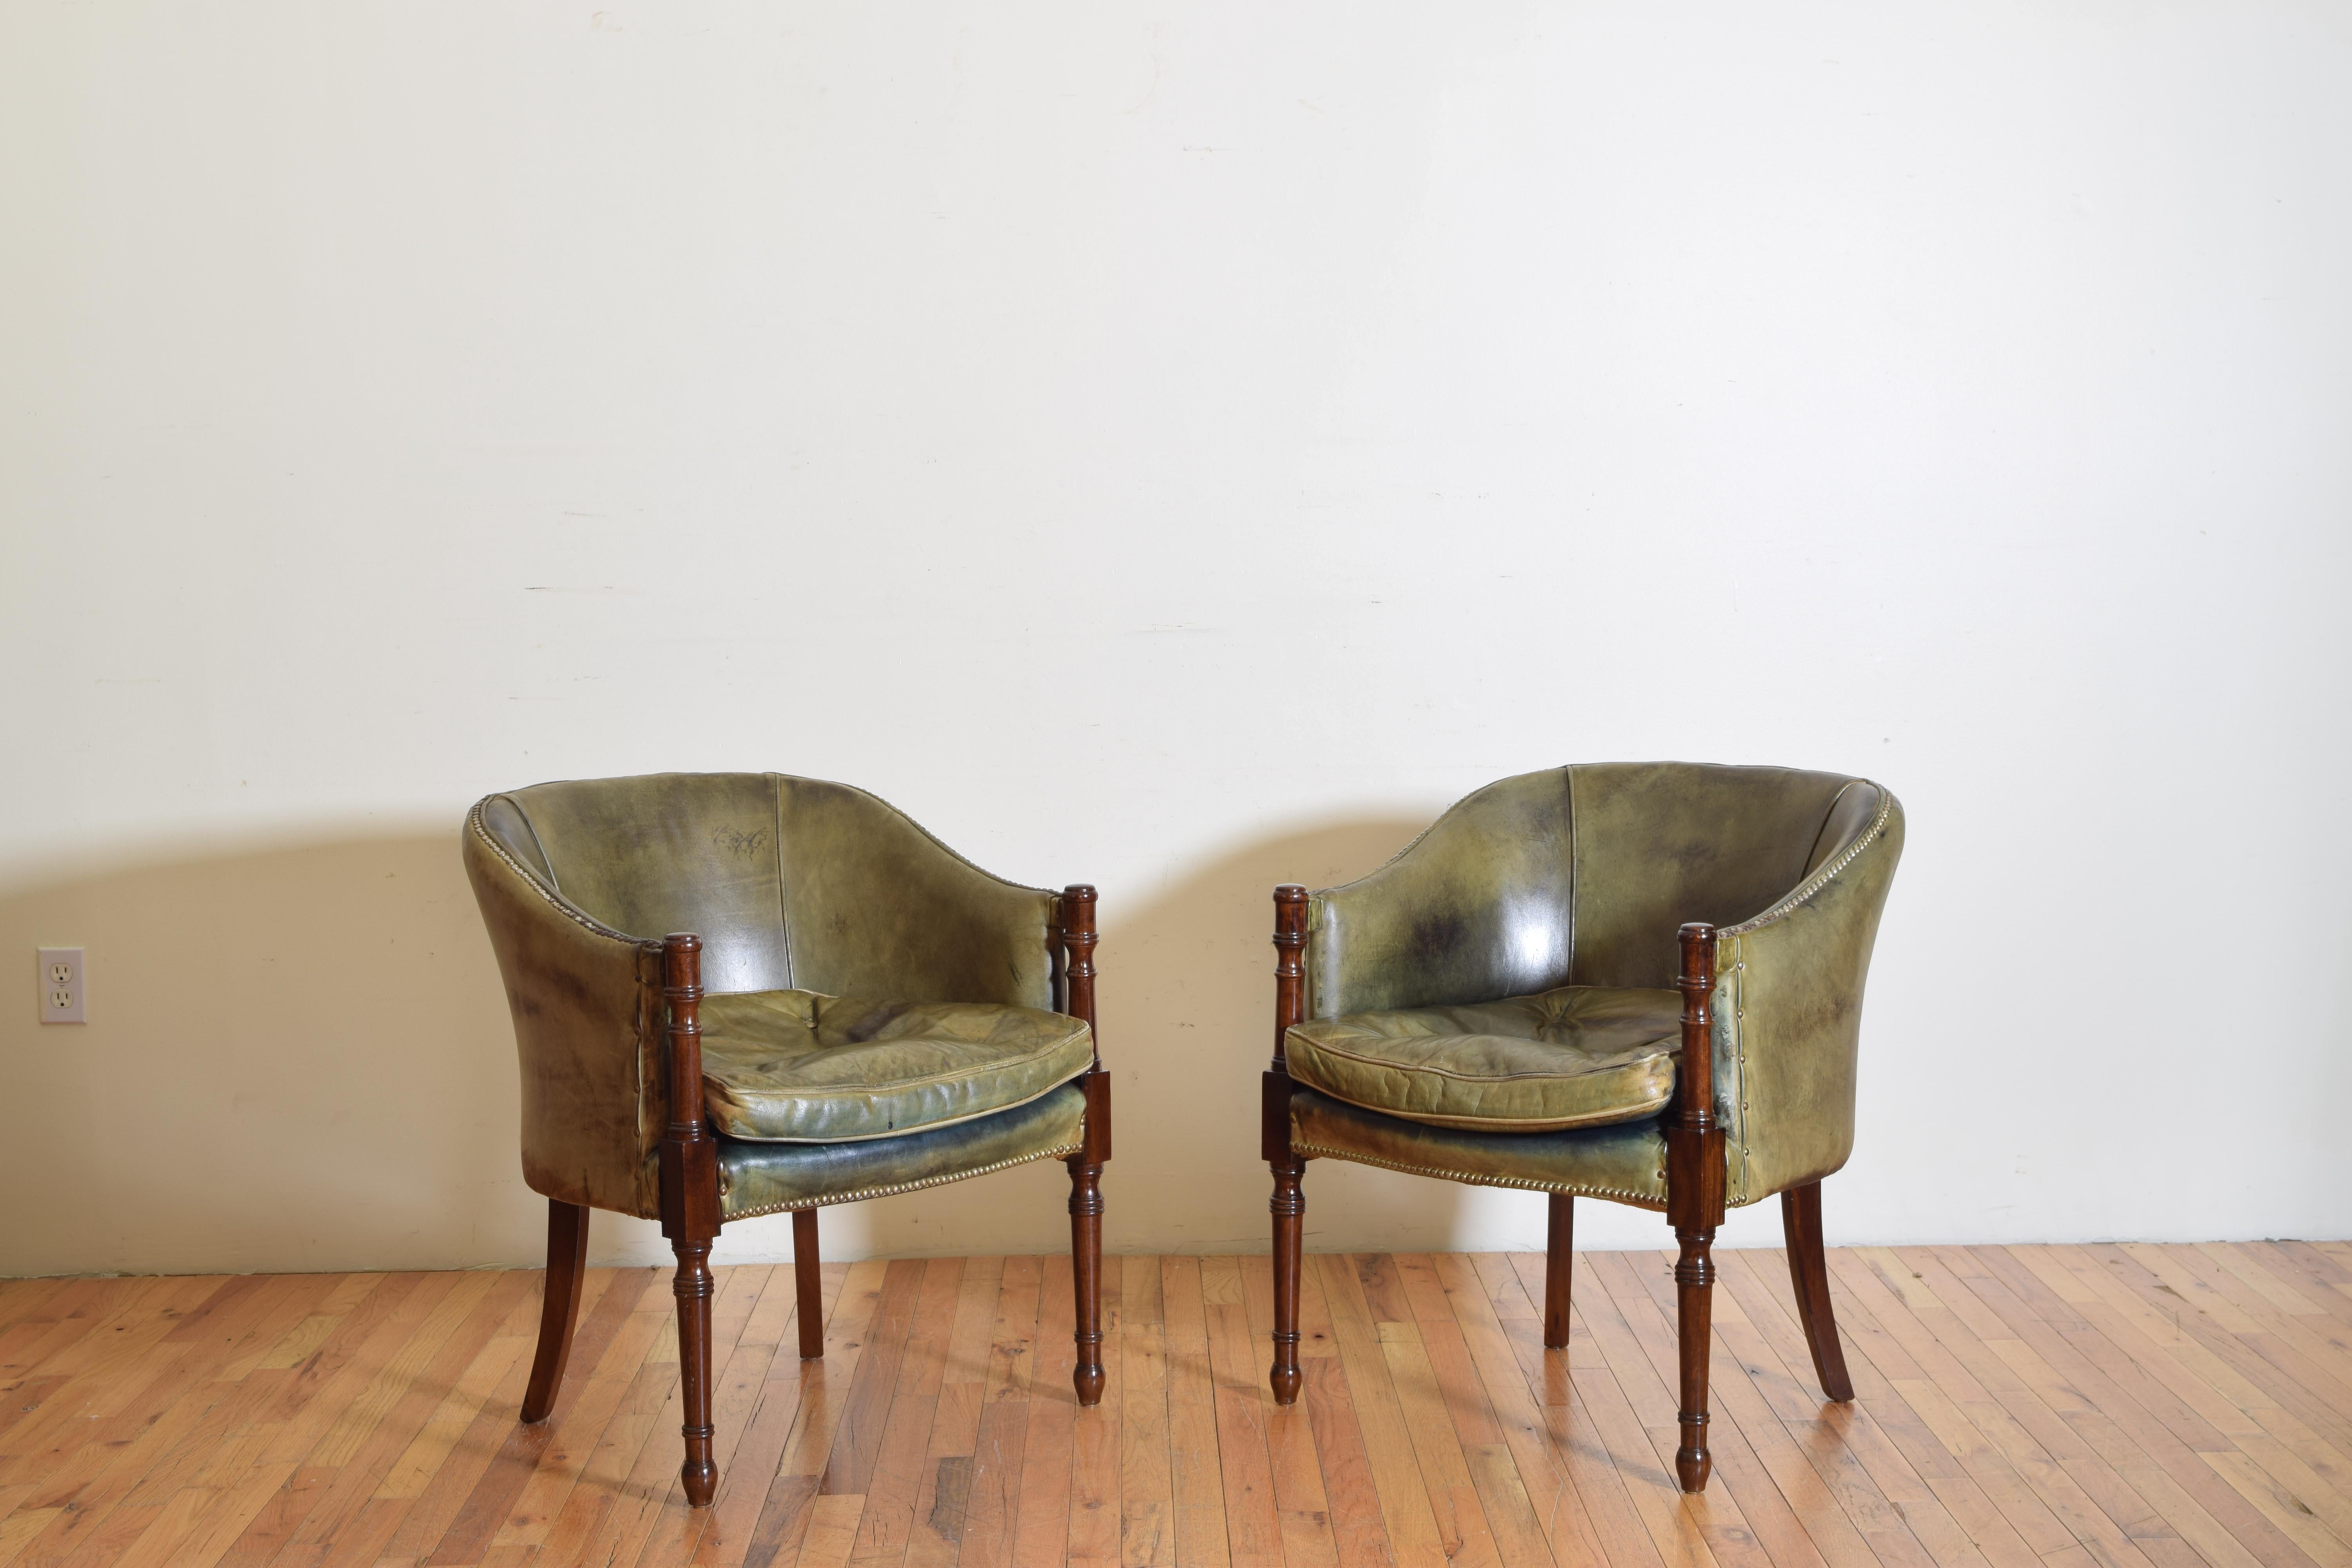 Upholstered in green leather, each having a concave backrest curving towards the front where turned arms supports continue to circular tapering legs, the back legs splayed, having loose down filled cushions.